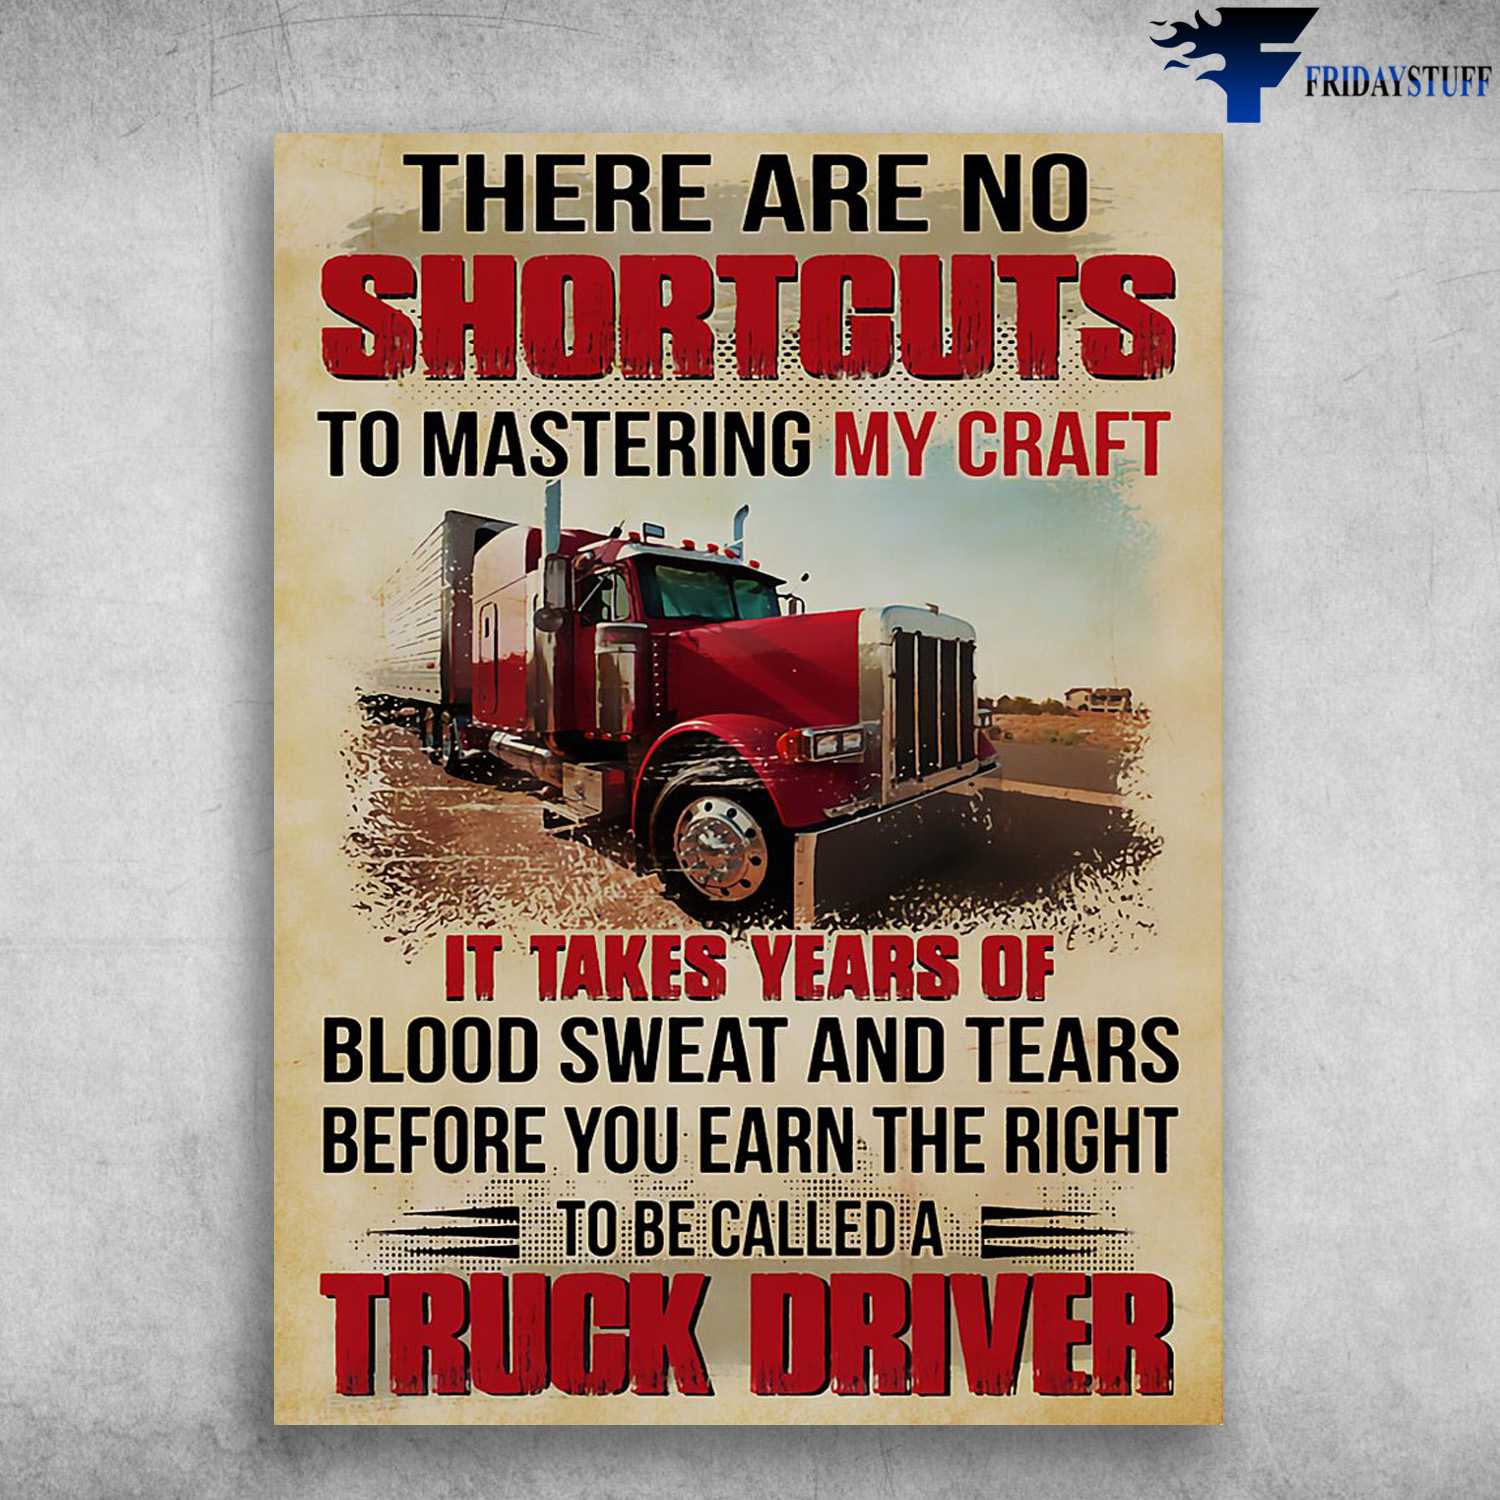 Trucker Poster, Truck Driver, There Are No Shortcuts, To Mastering My Craft, It Takes Years Of, Blood Sweat And Tears, Before You Earn The Right, To Becalled A Truck Driver